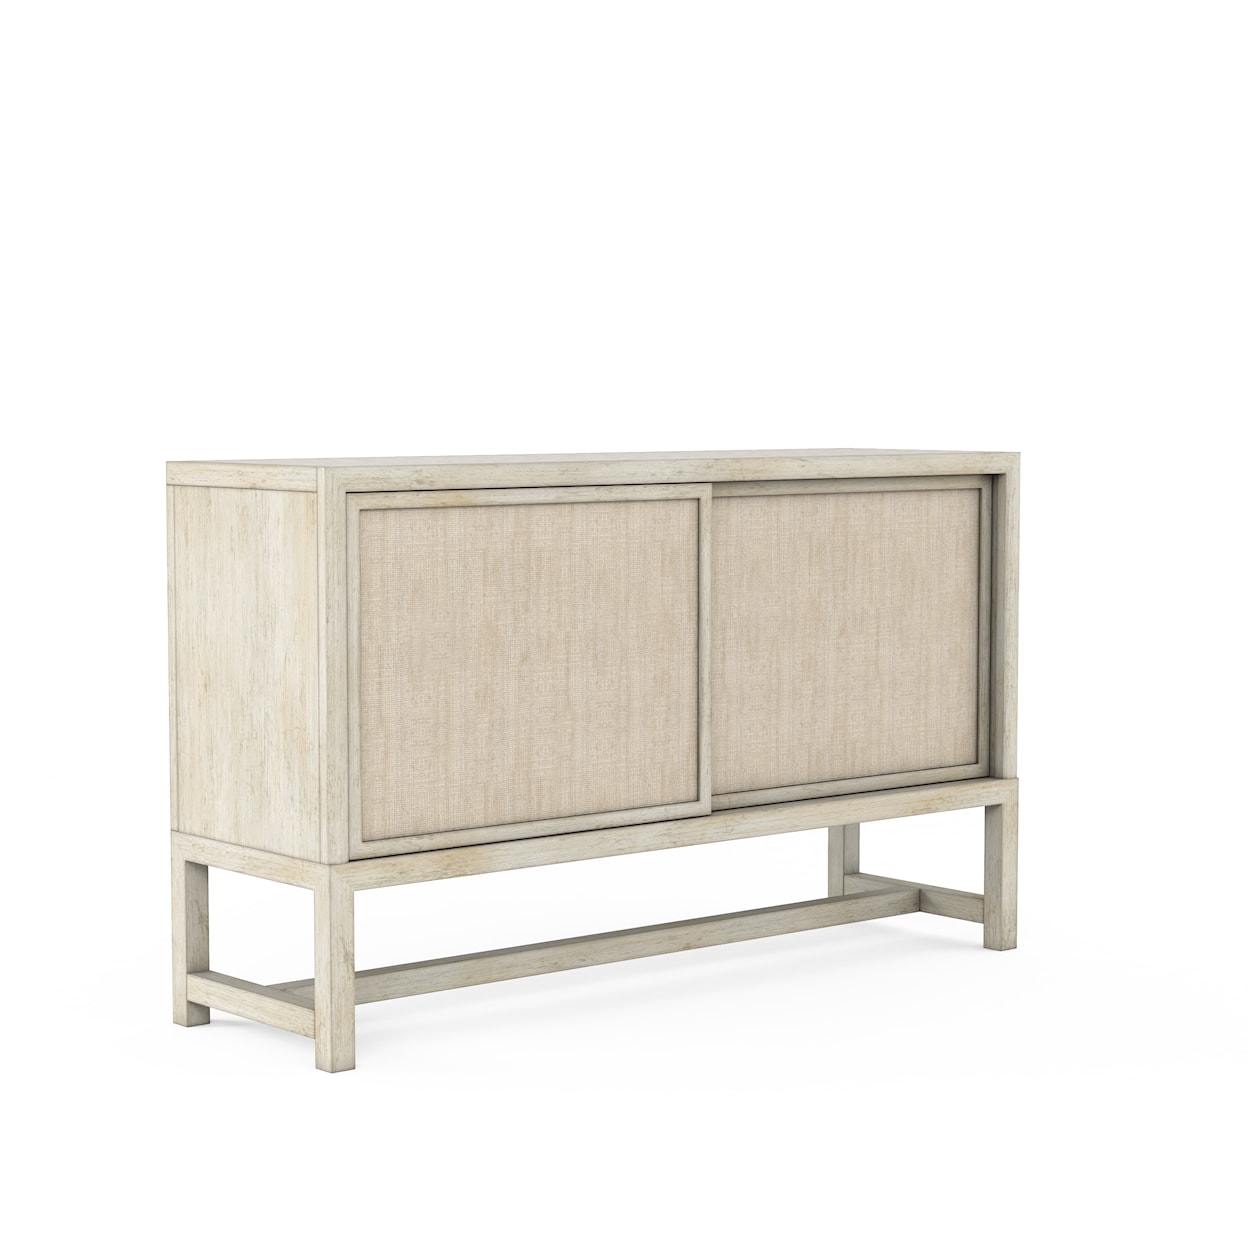 A.R.T. Furniture Inc Cotiere Sideboard 